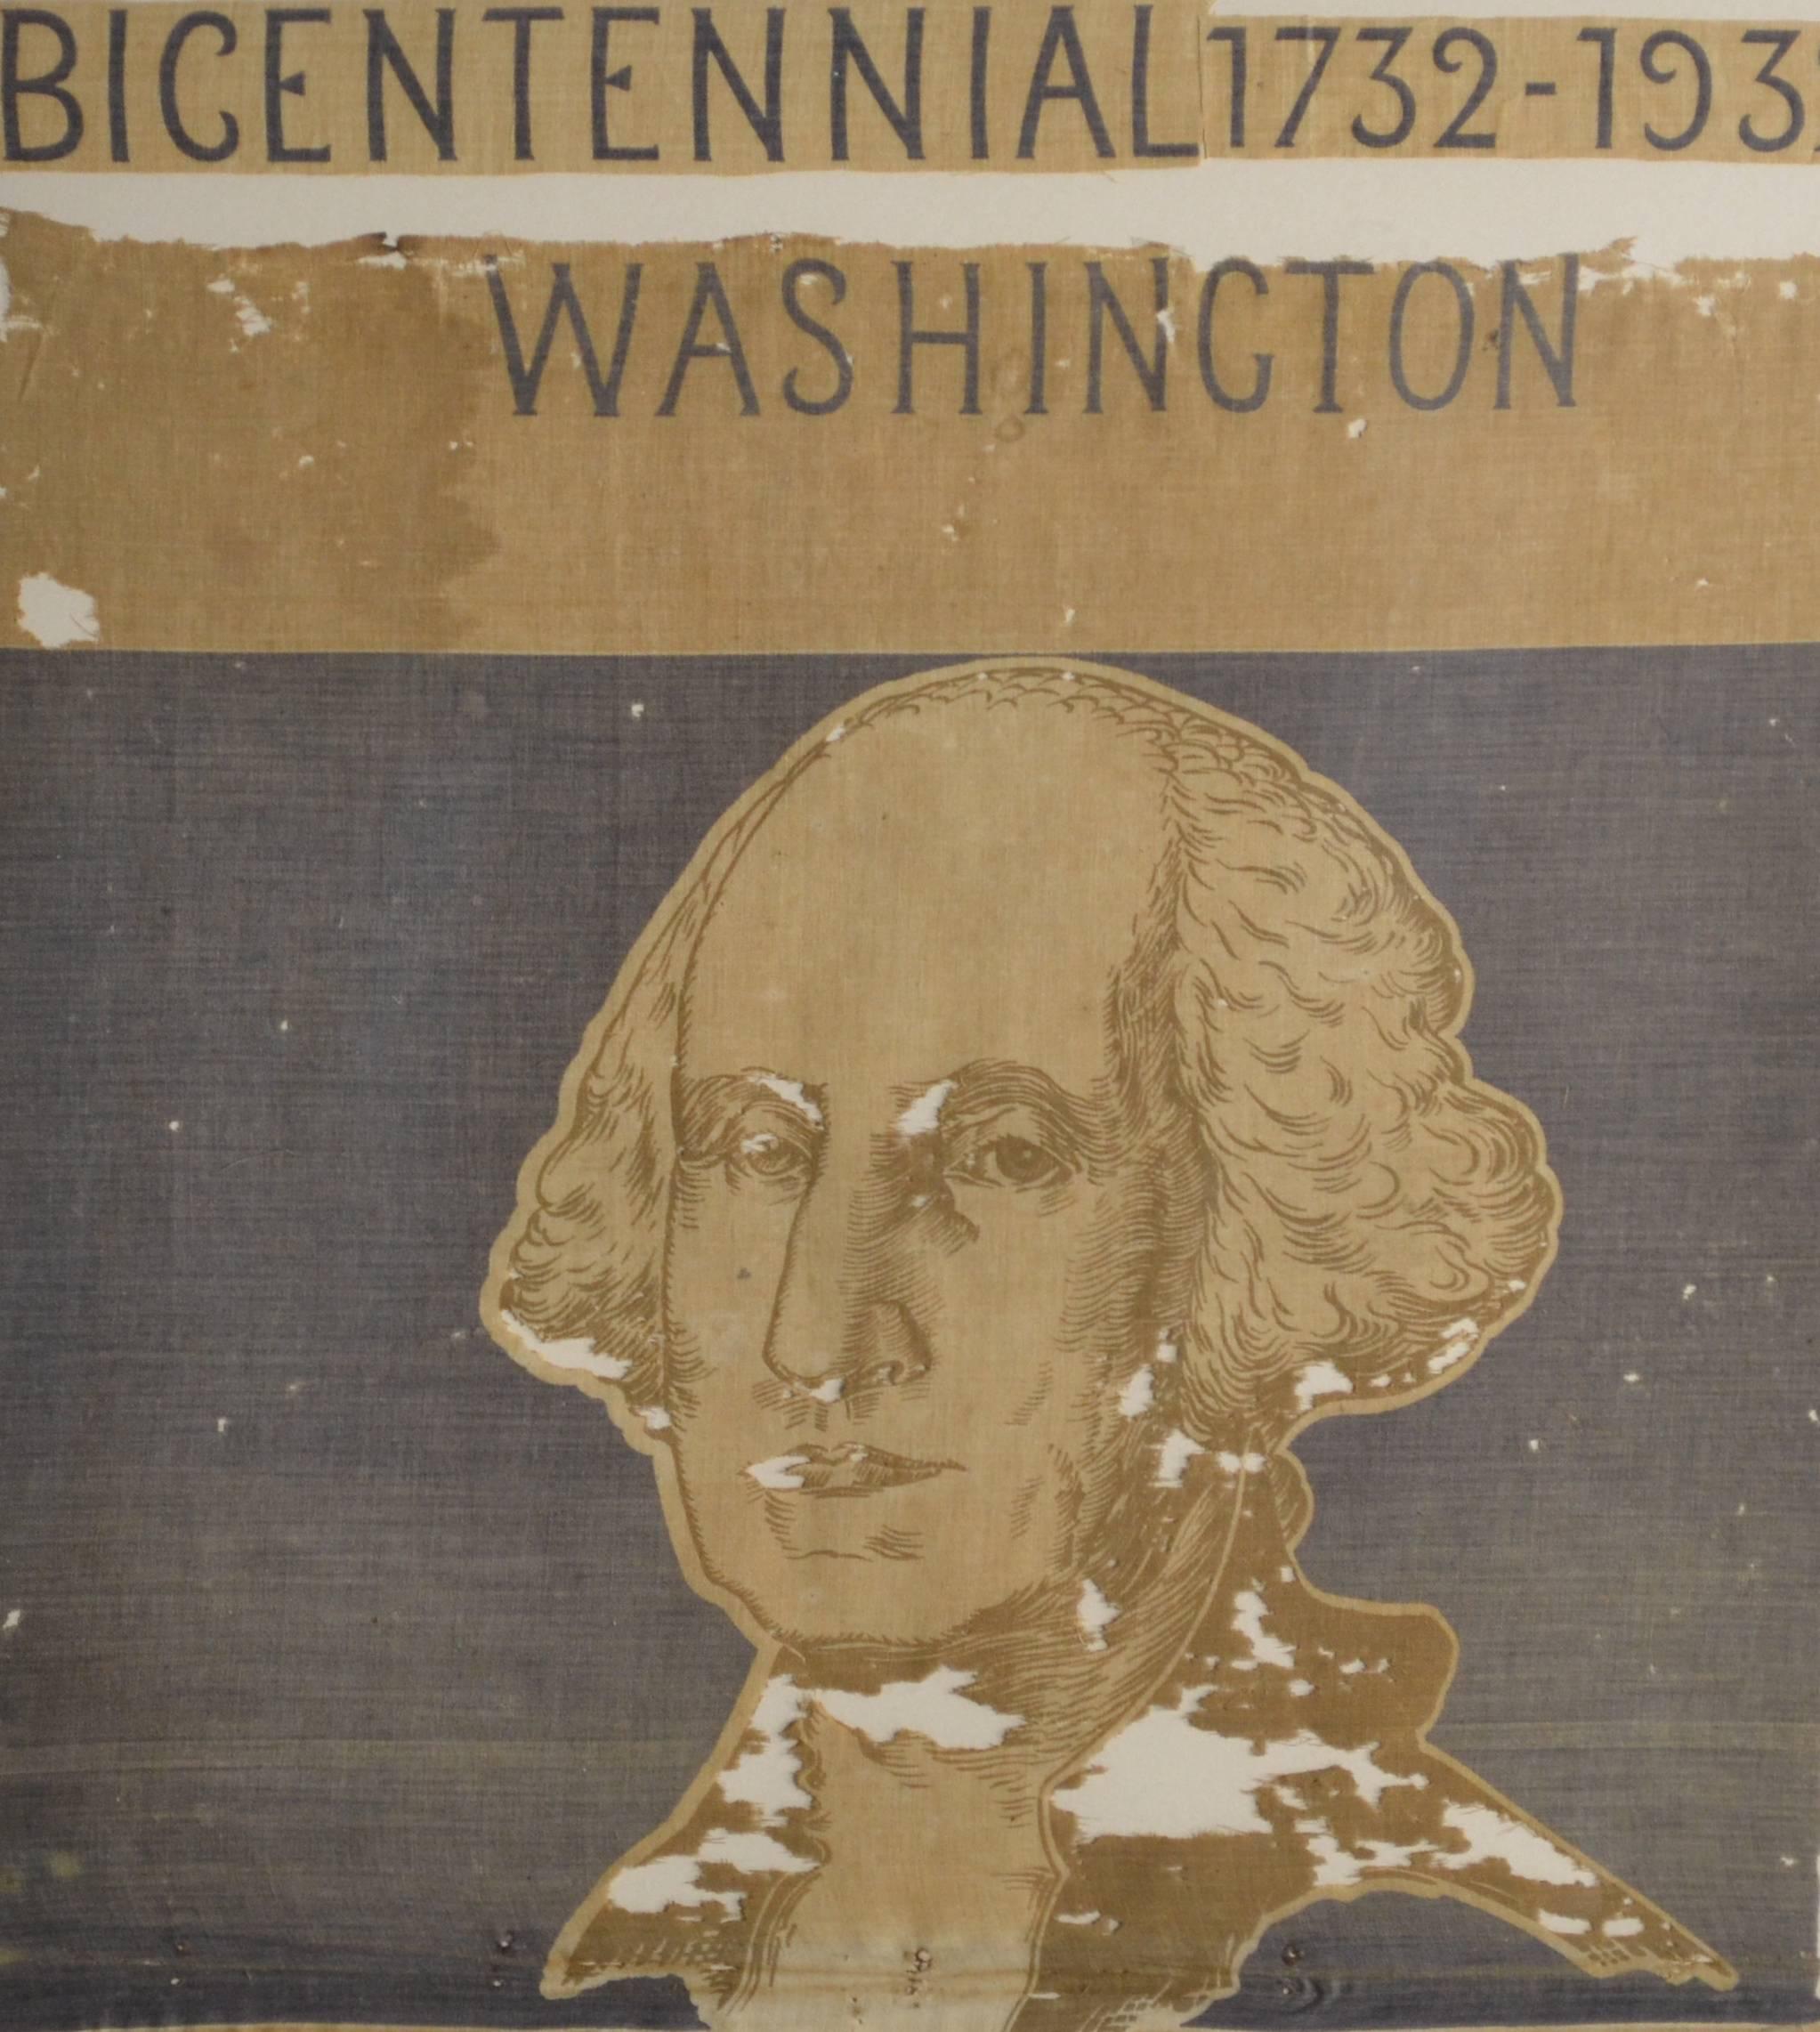 Really cool vintage patriotic textile from 1932, 85 years old. Celebrating the 200th Anniversary of the birth of our 1st President George Washington. It presents itself as a great piece of art.
Museum framing with UV acrylic
Historical